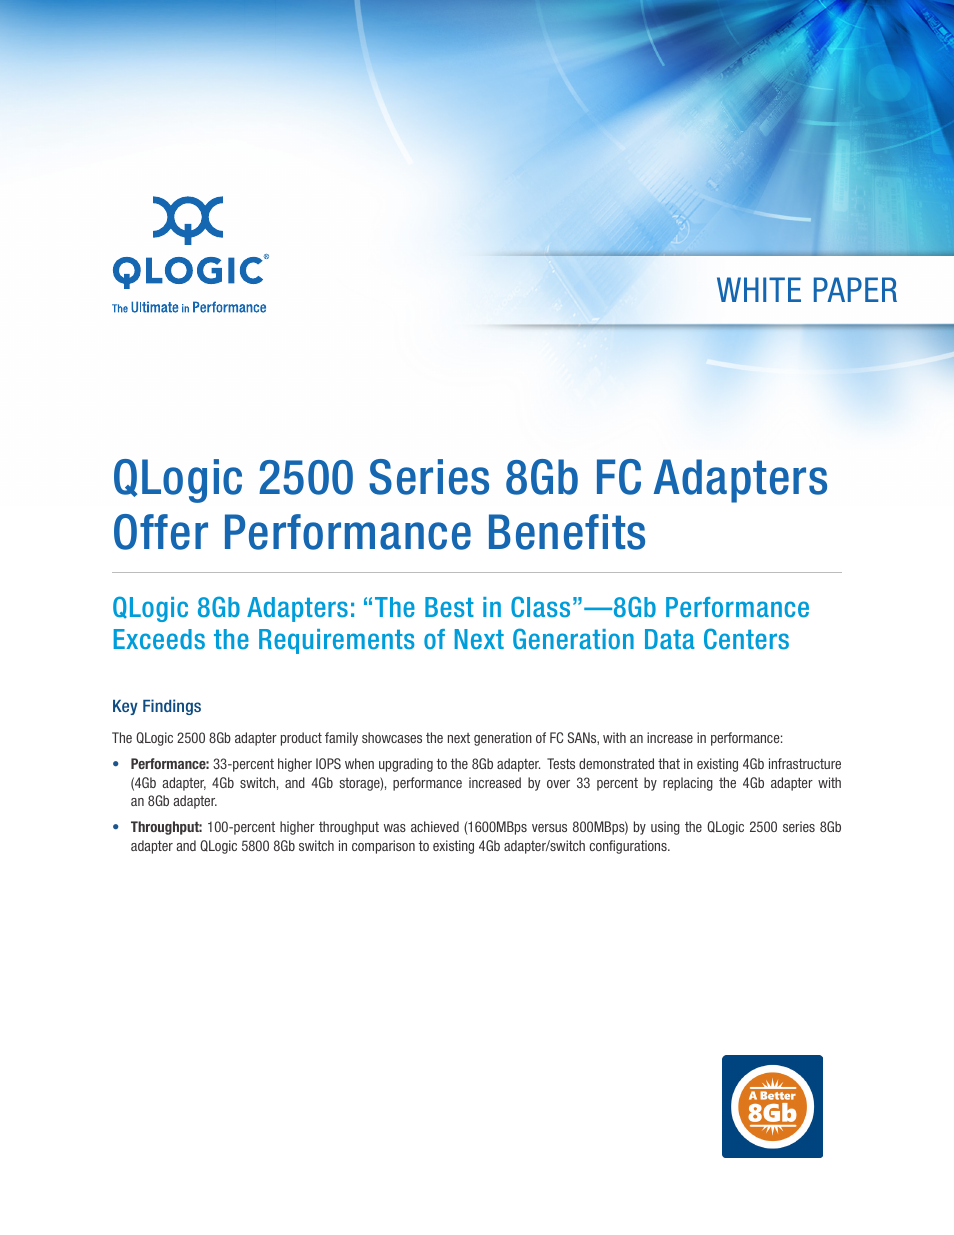 2500 Series 8Gb FC Adapters Offer Performance Benefits